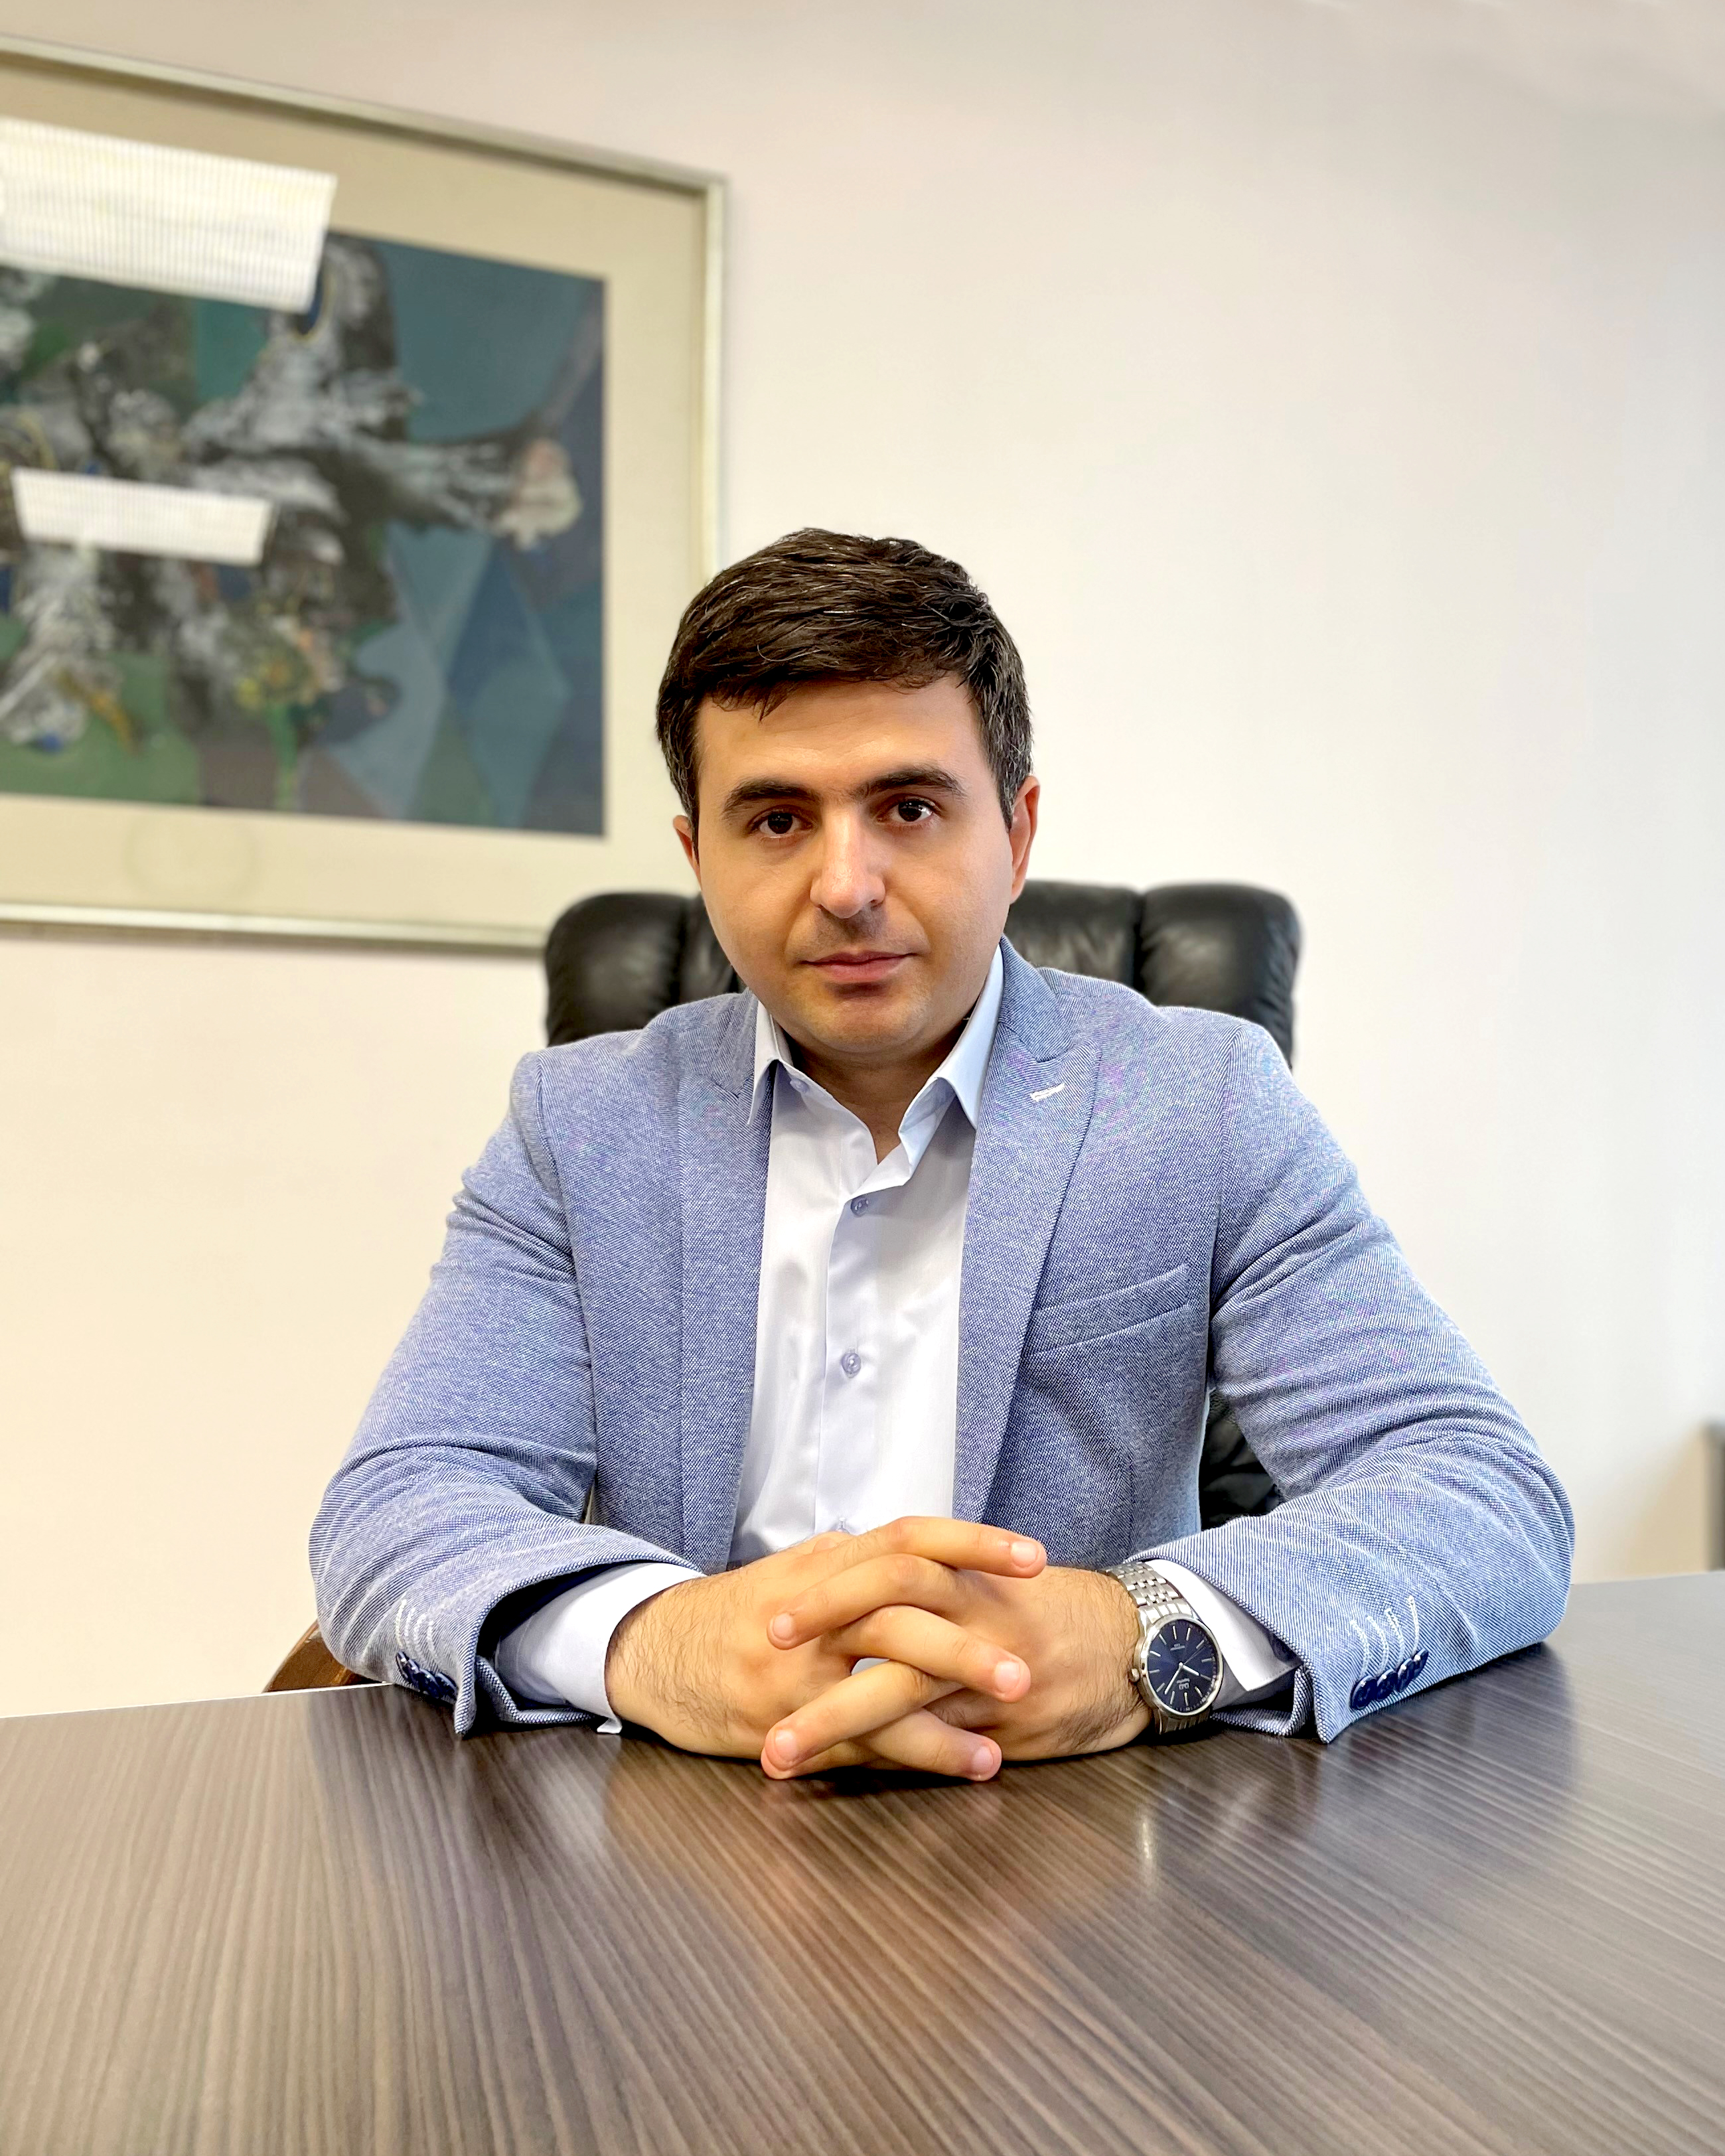  THE INTERVIEW OF DEPUTY DIRECTOR OF LENDING DEPARTMENT, HEAD OF PROJECT FINANCING DIVISION ARA MAKARYAN TO INTERNATIONAL GREENPACT COMPANY